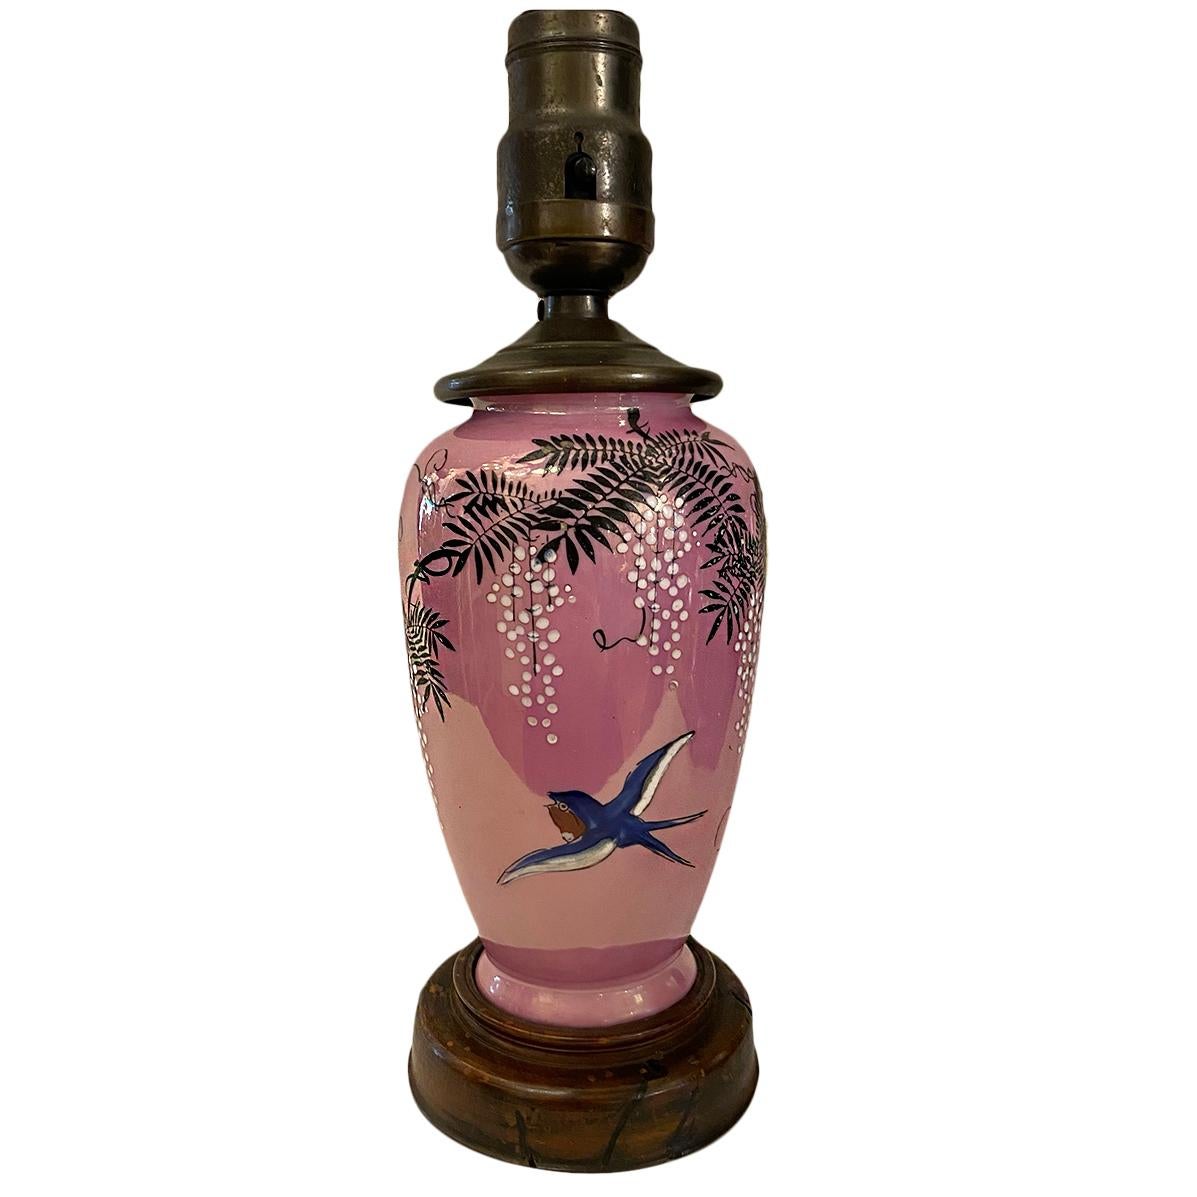 A 19th century Japanese pink lustre-glazed porcelain vase bird and floral decoration mounted as lamp.

Measurements:
Height of body: 8